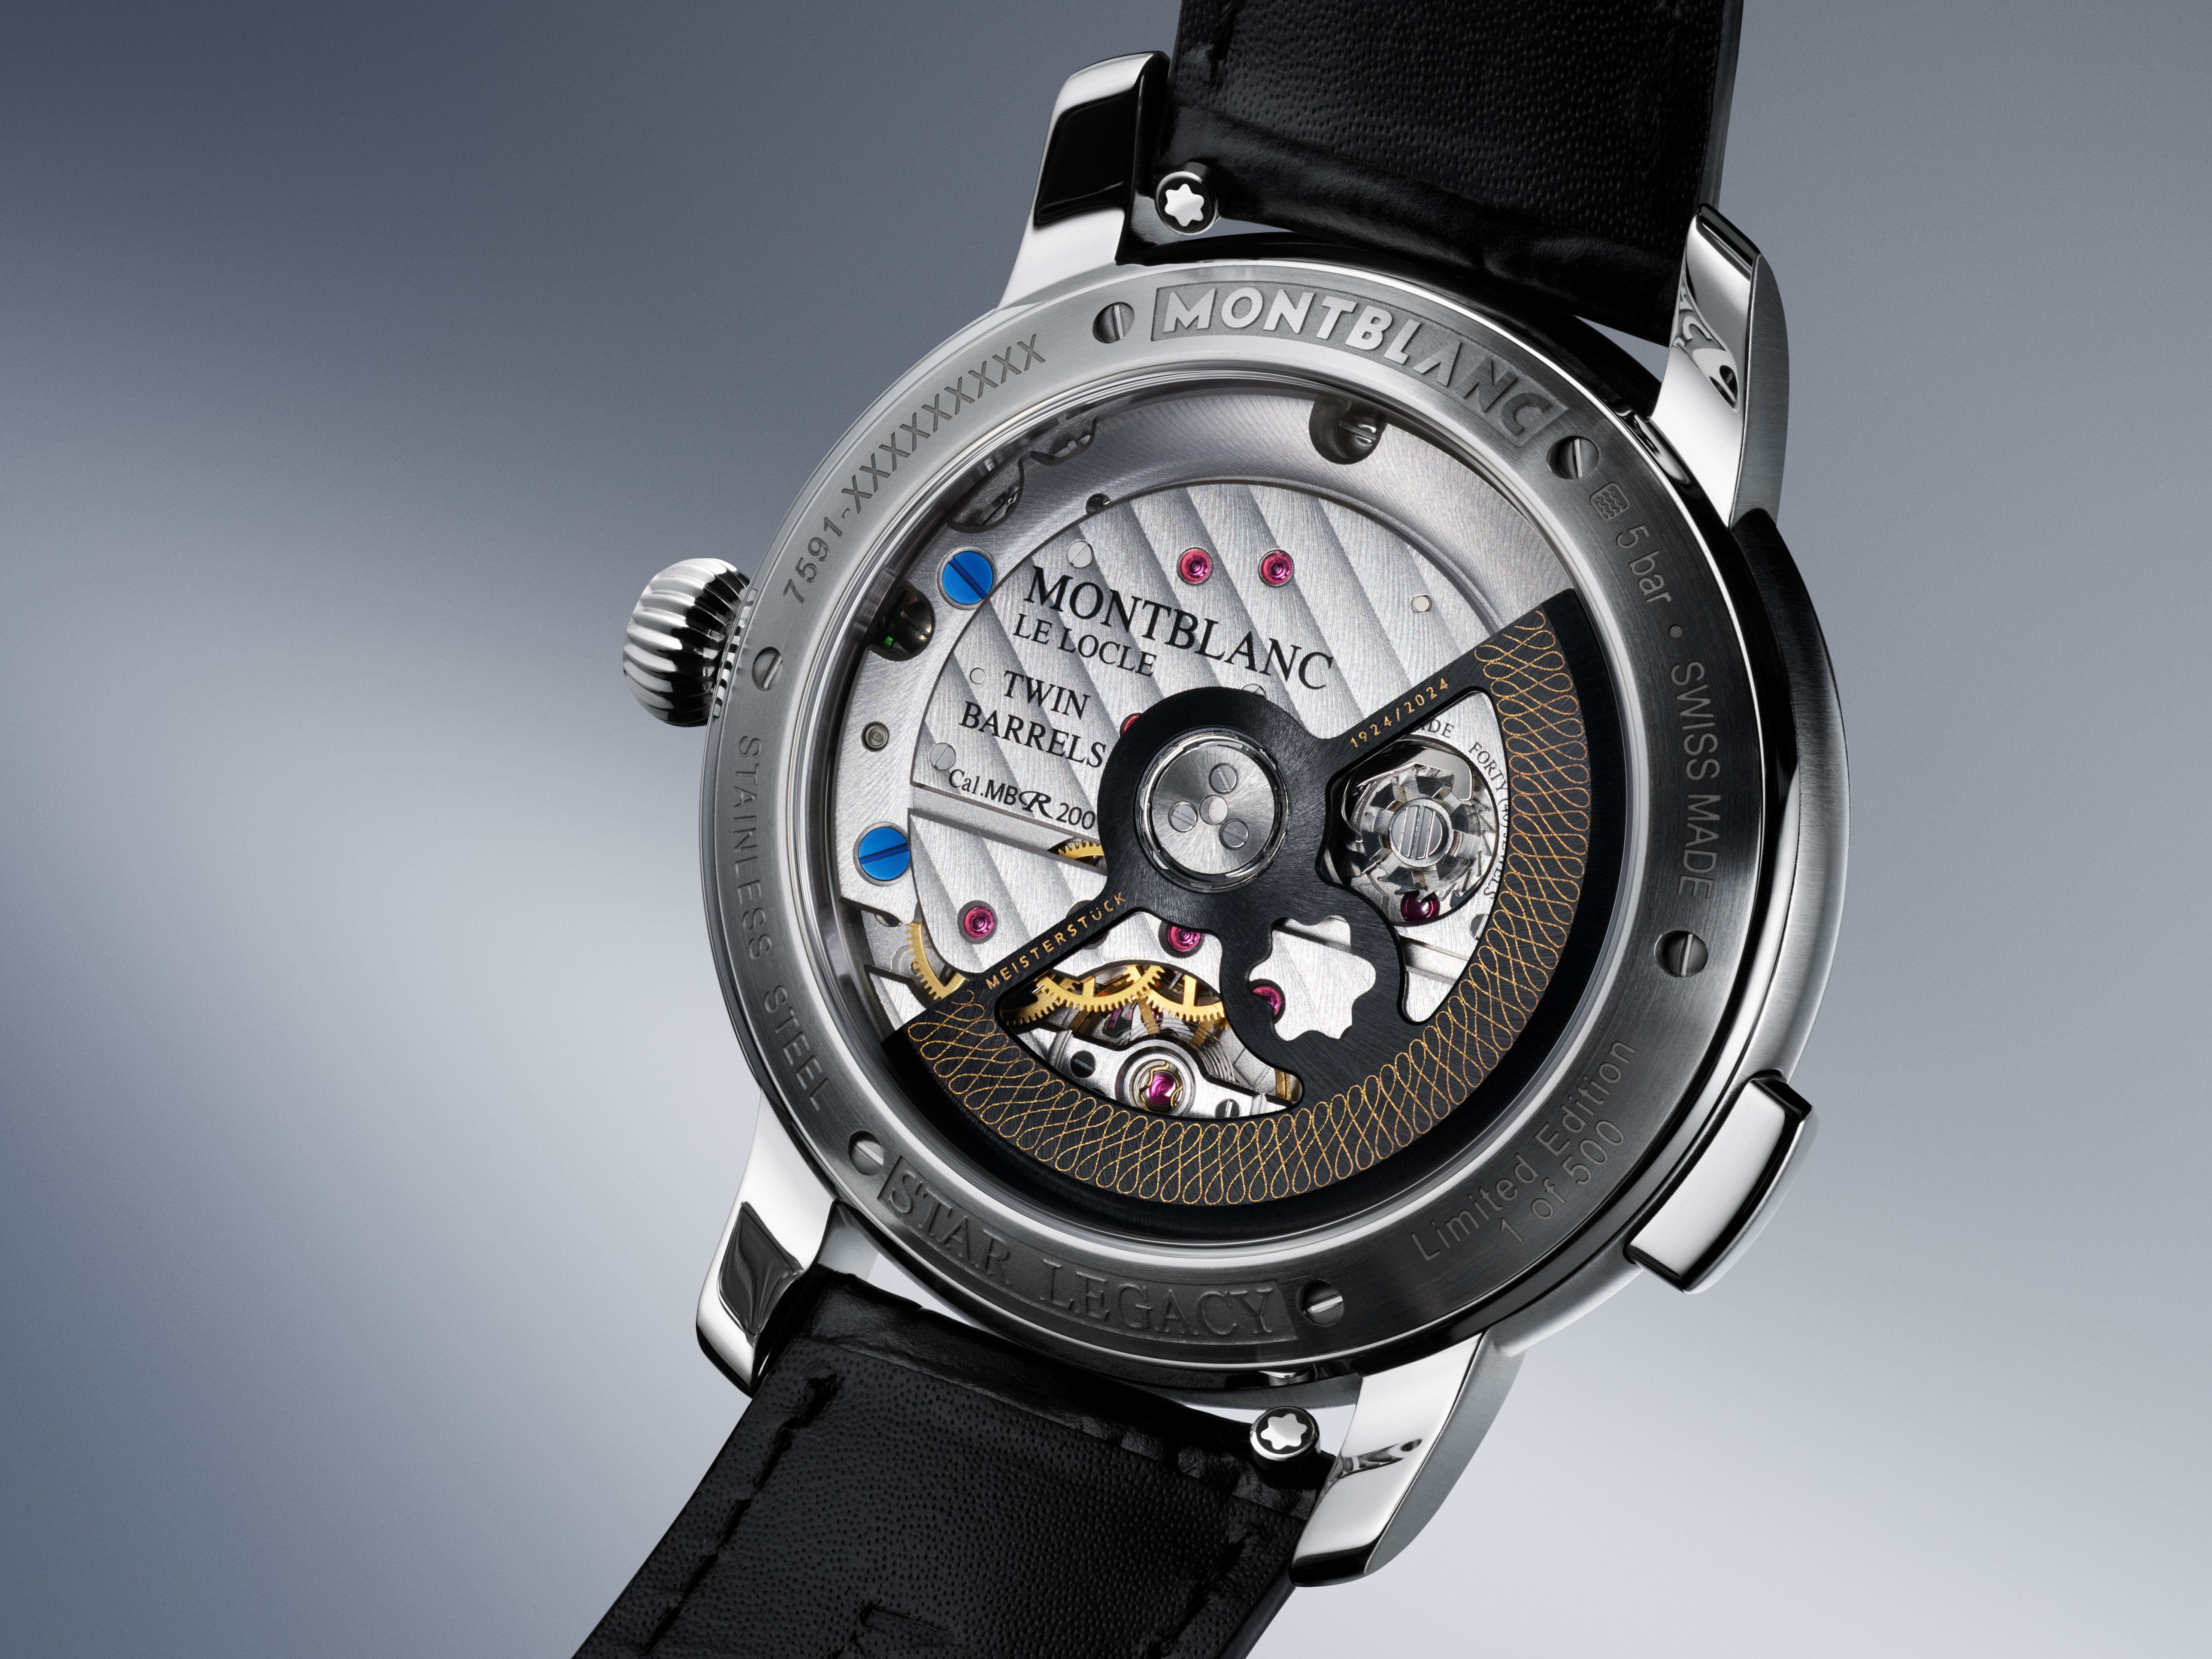 The watch is powered by an in-house monopusher chronograph movement MB R200